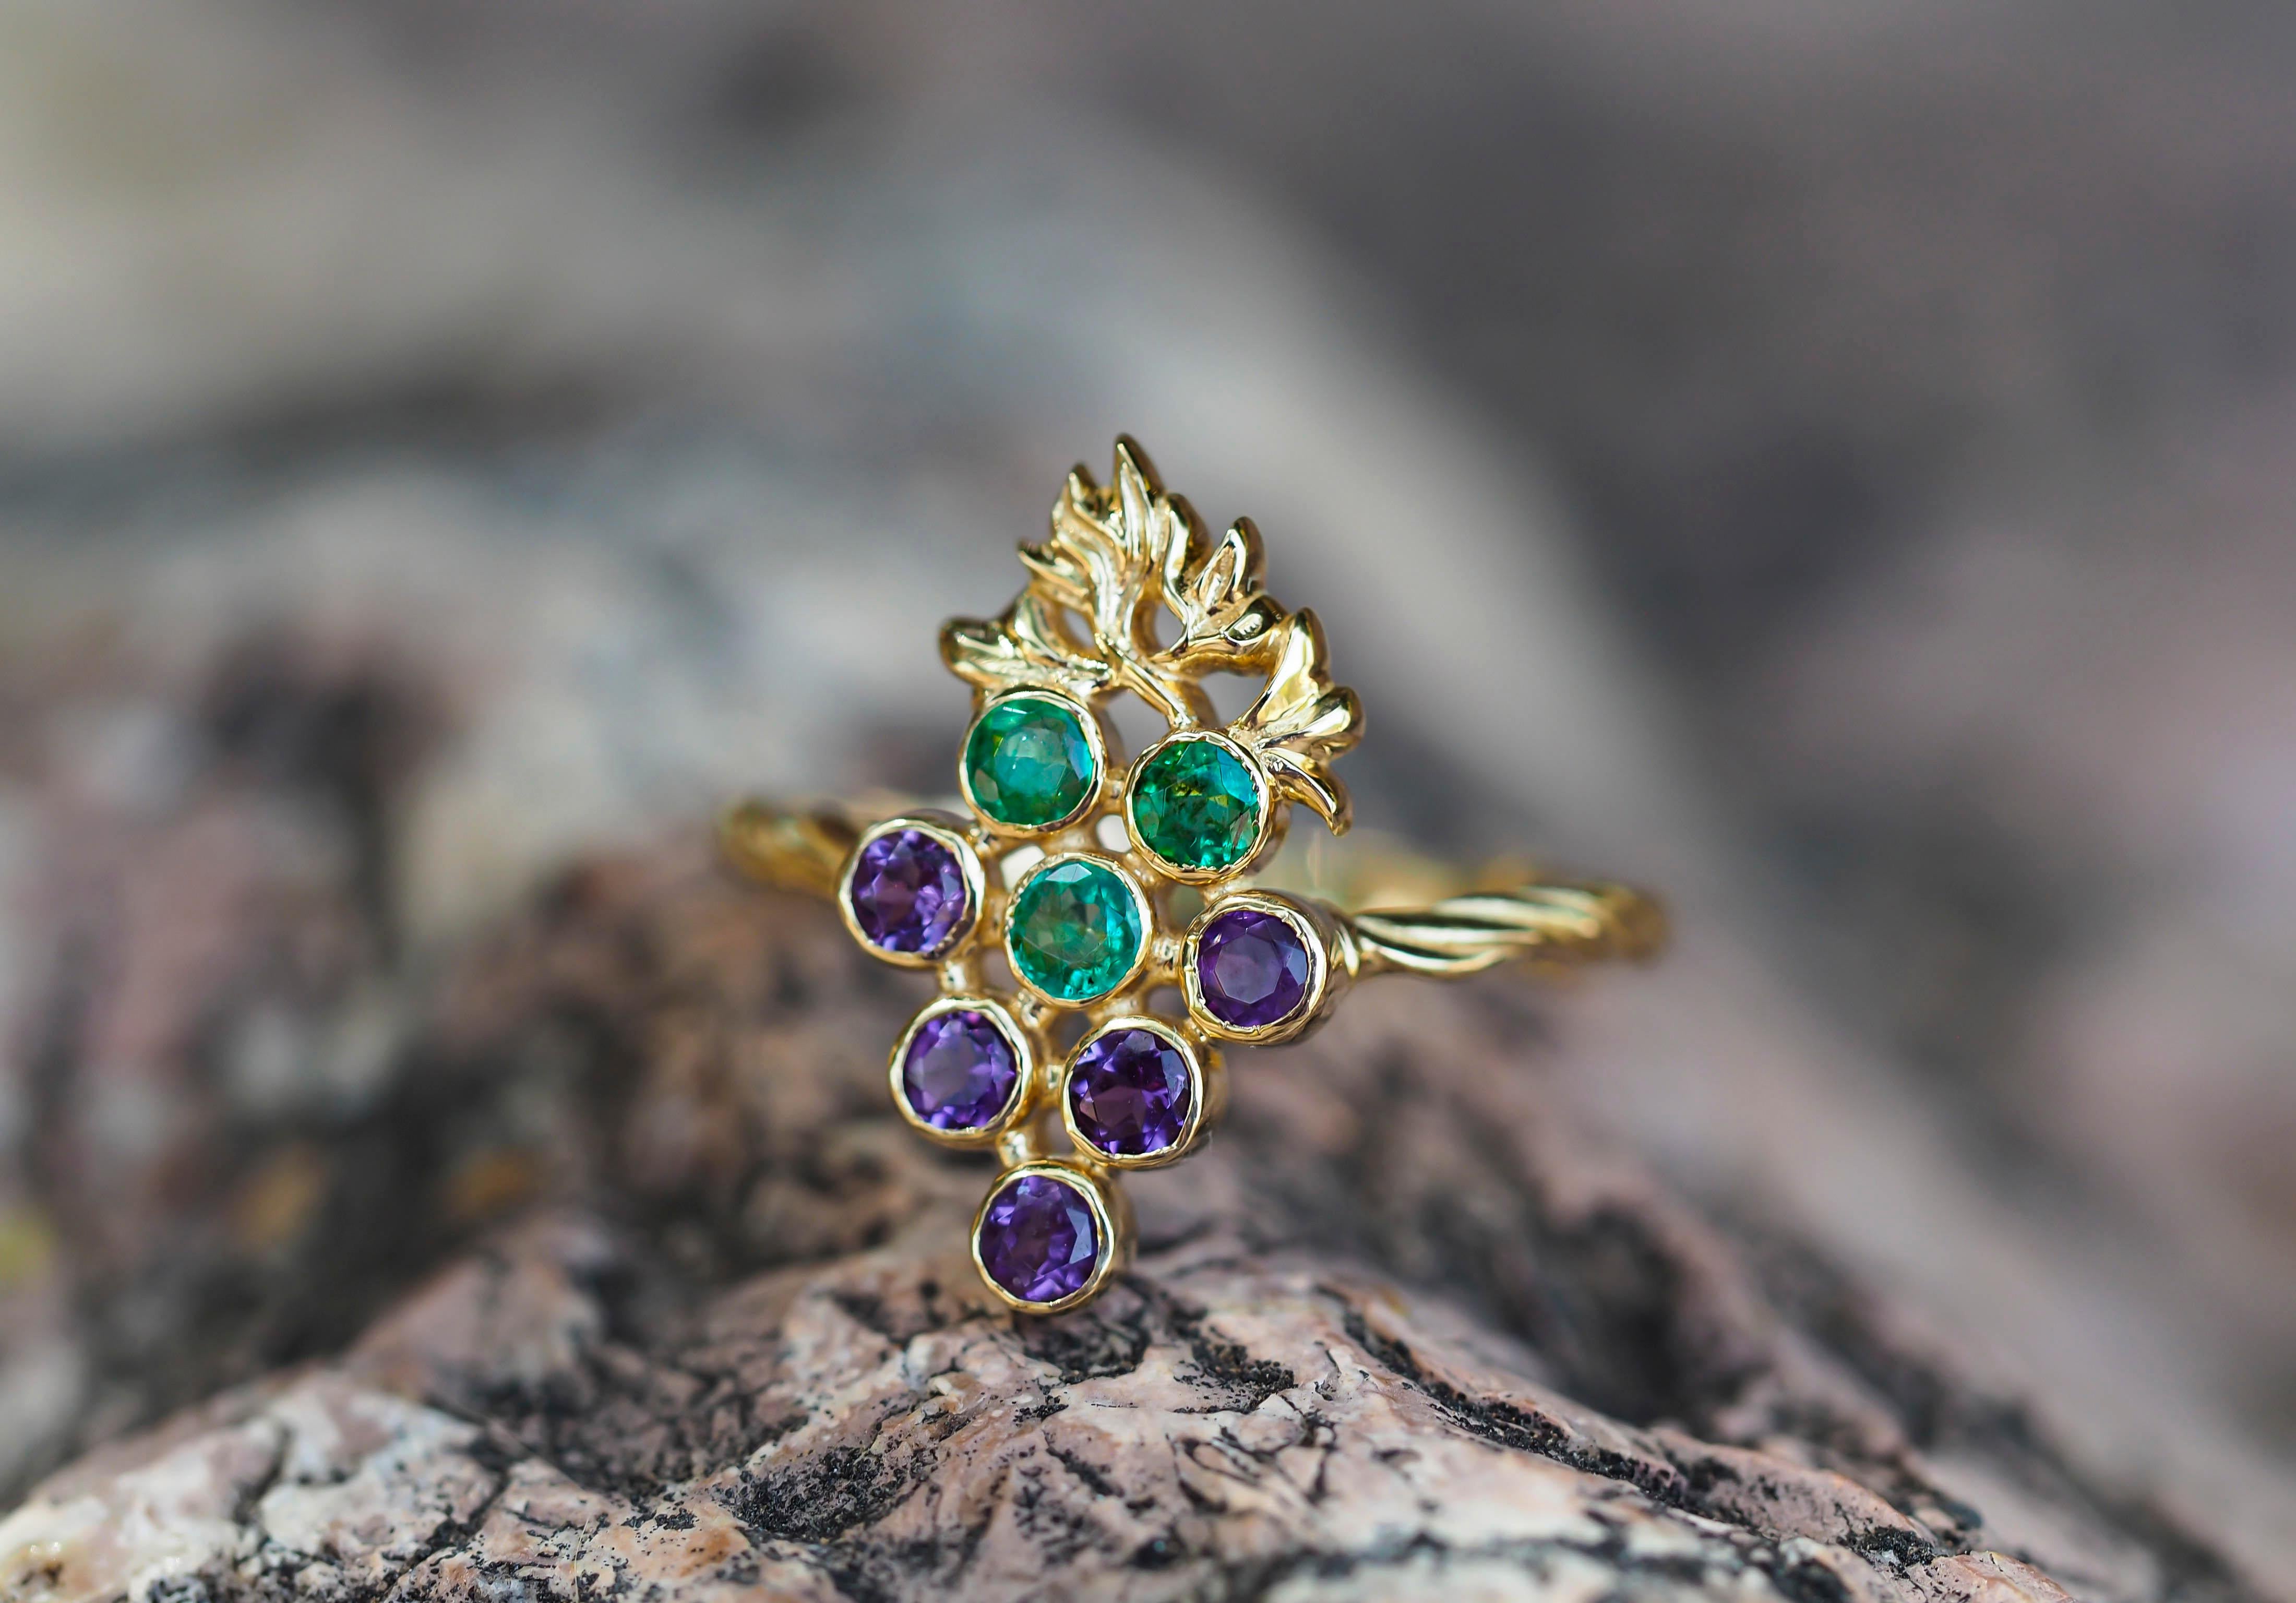 For Sale:  14k Gold Ring with Natural Emeralds and Amethysts. Grape gold ring. 10